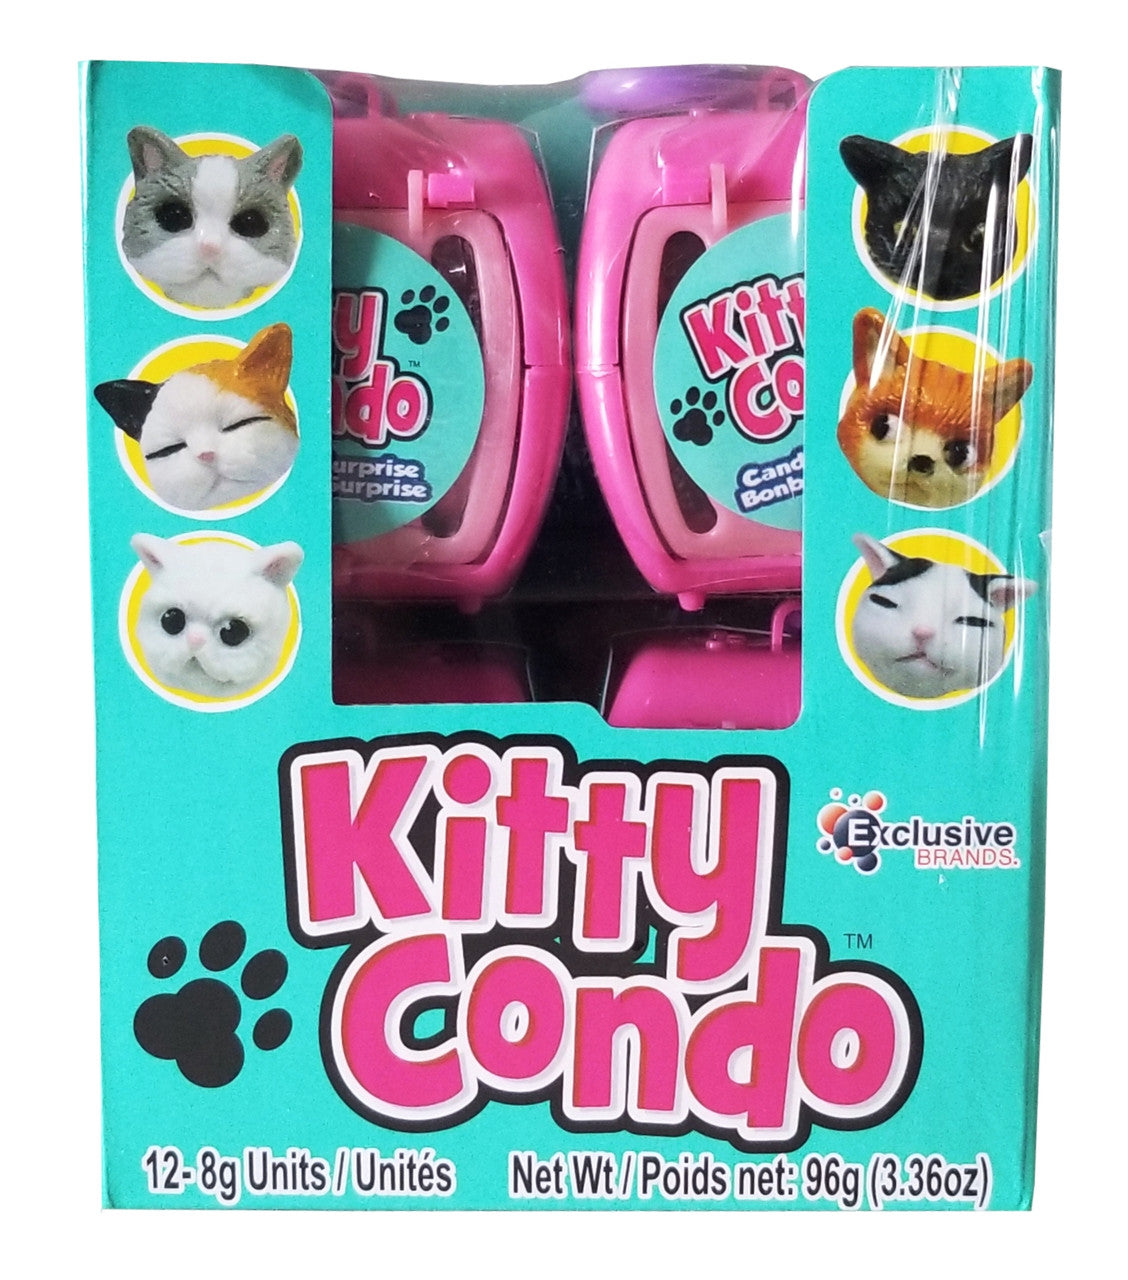 Exclusive Brands Kitty Condo filled with Candy, (12 x 8g/0.3 oz.), 96g/3.36 oz., Box {Imported from Canada}